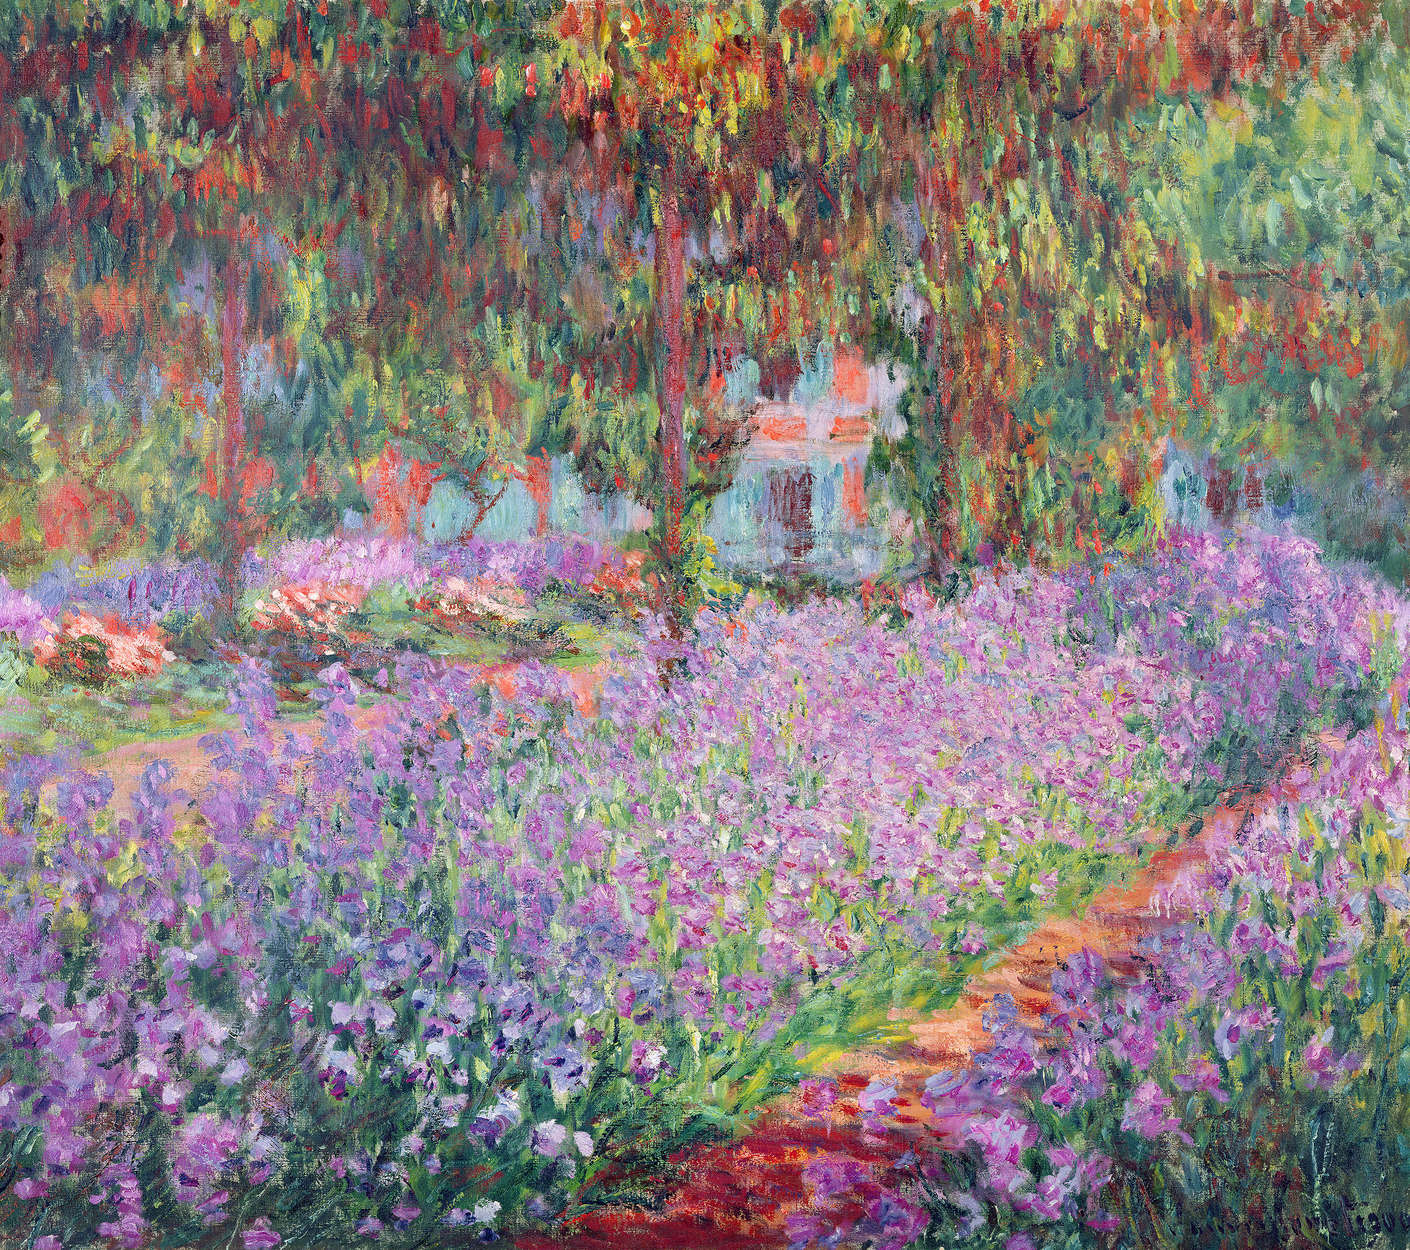             Photo wallpaper "The artist's garden in Giverny" by Claude Monet
        